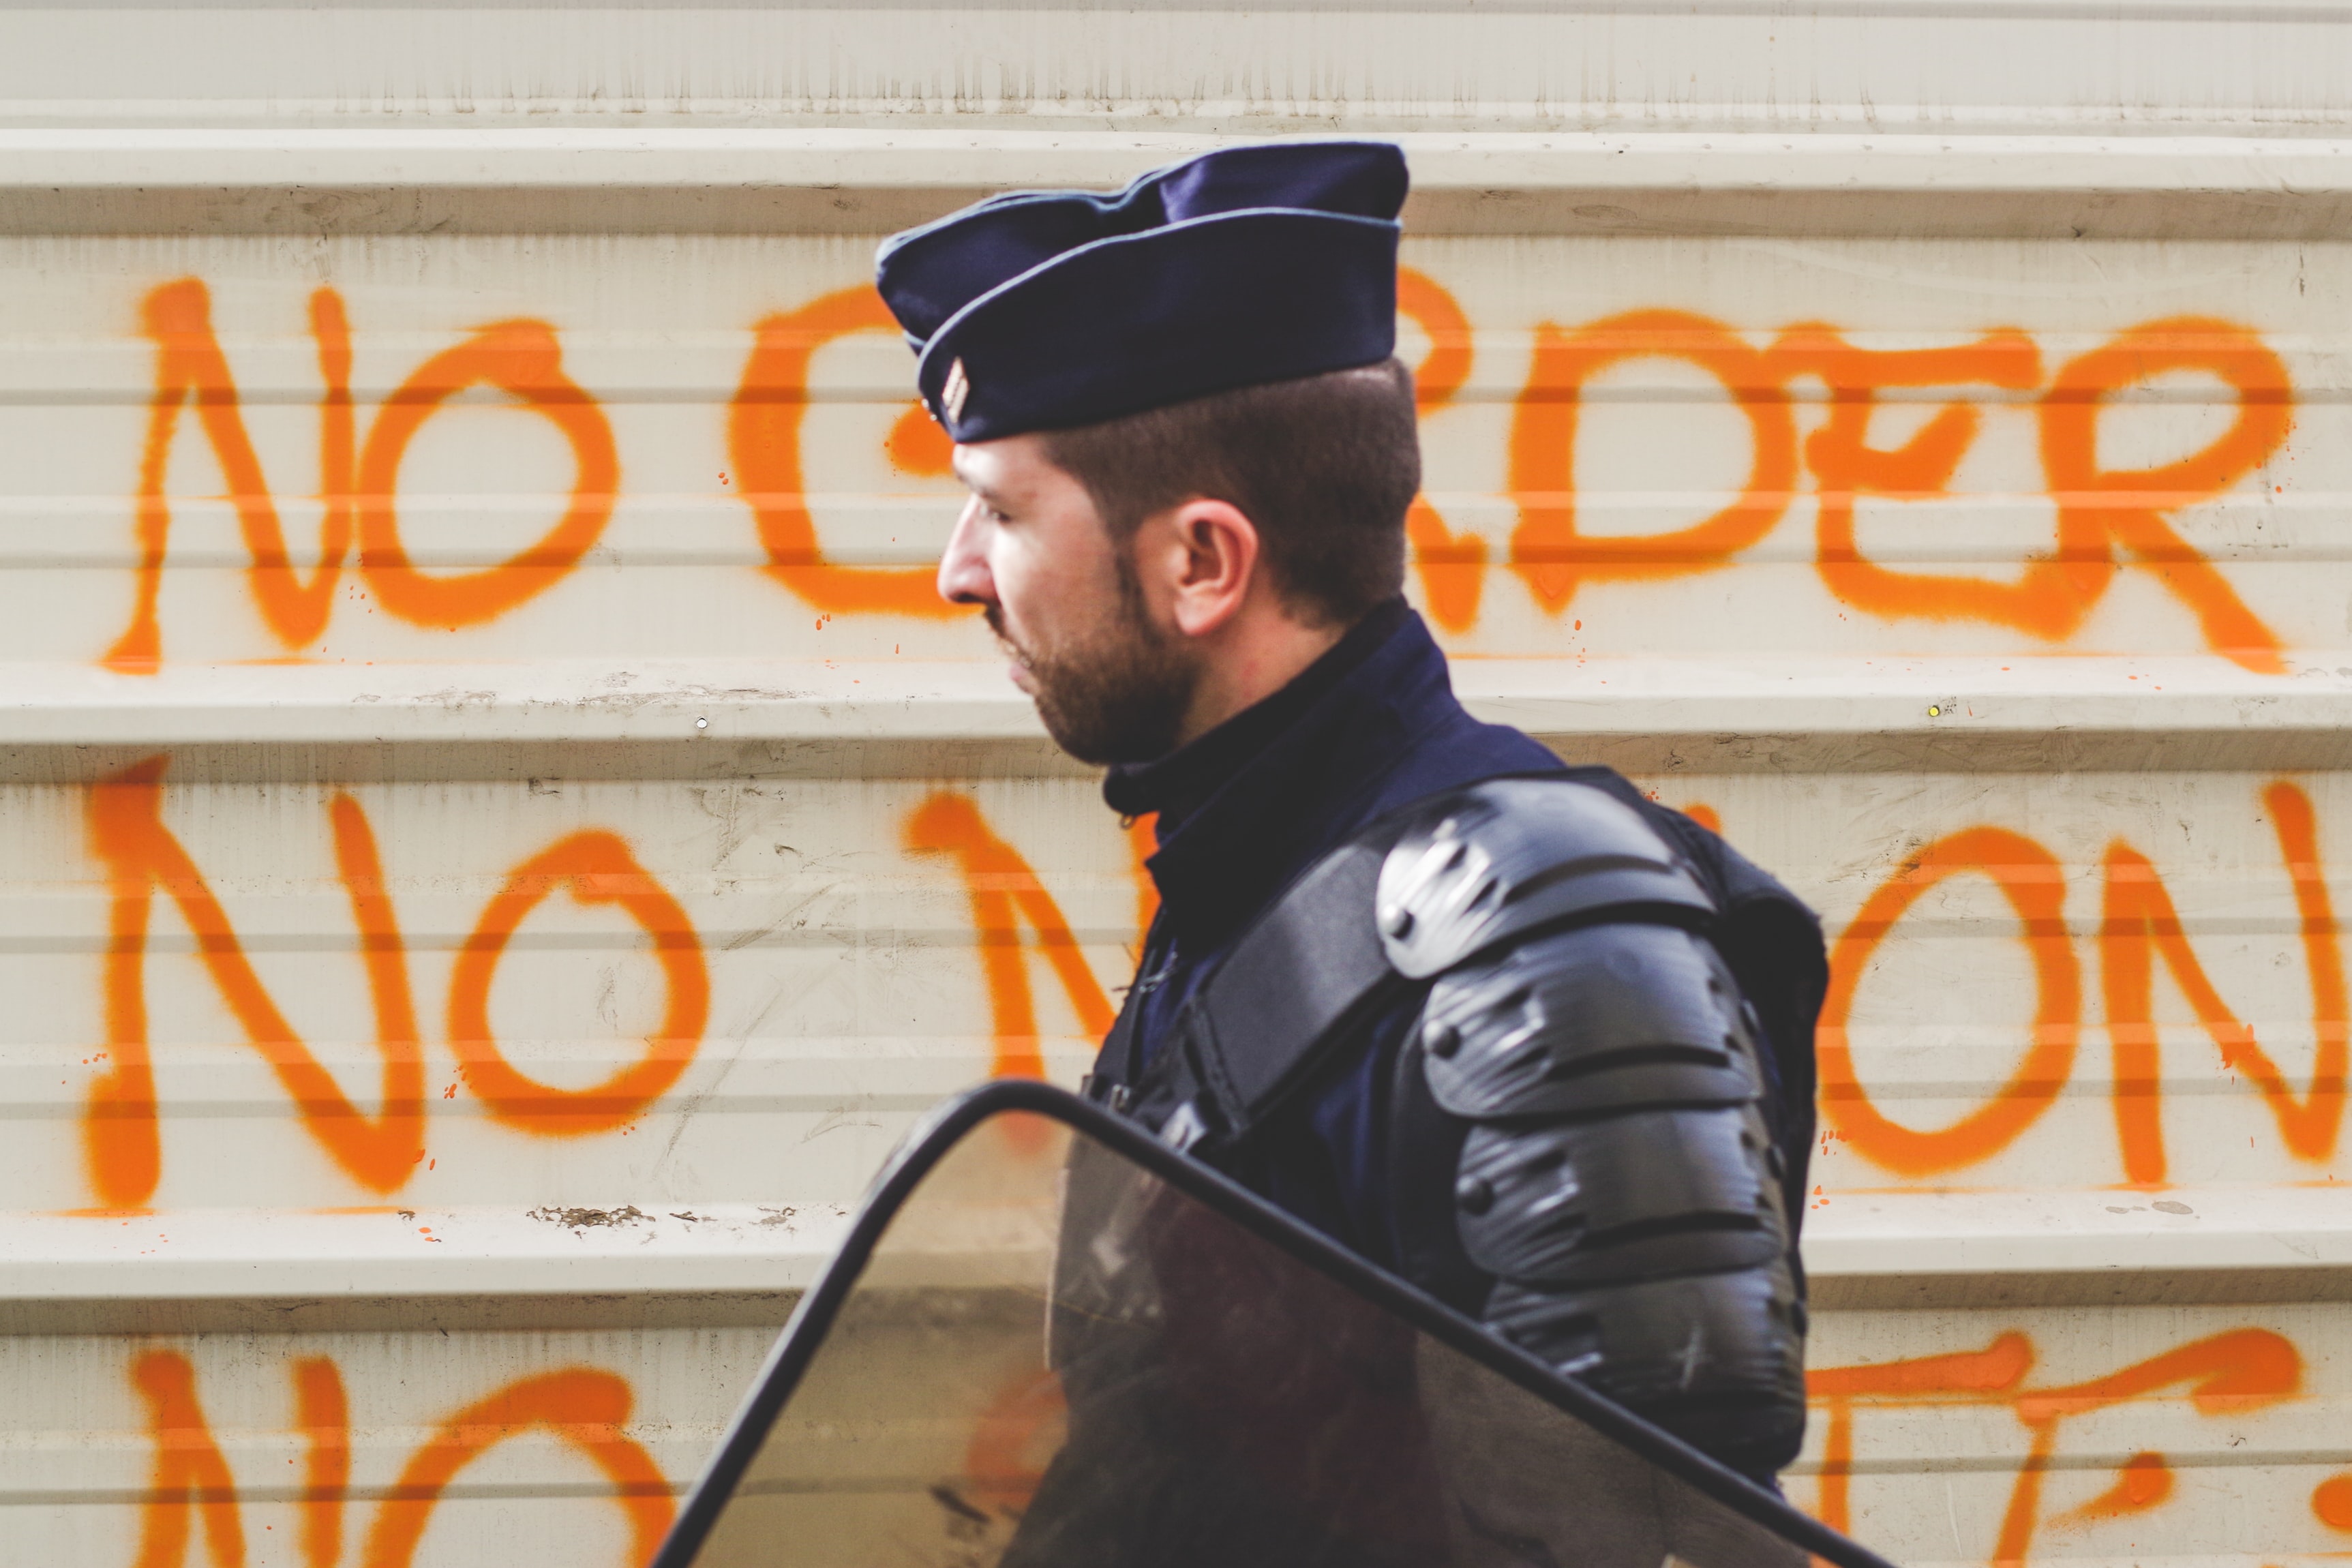 soldier in front of graffiti from unsplash.com